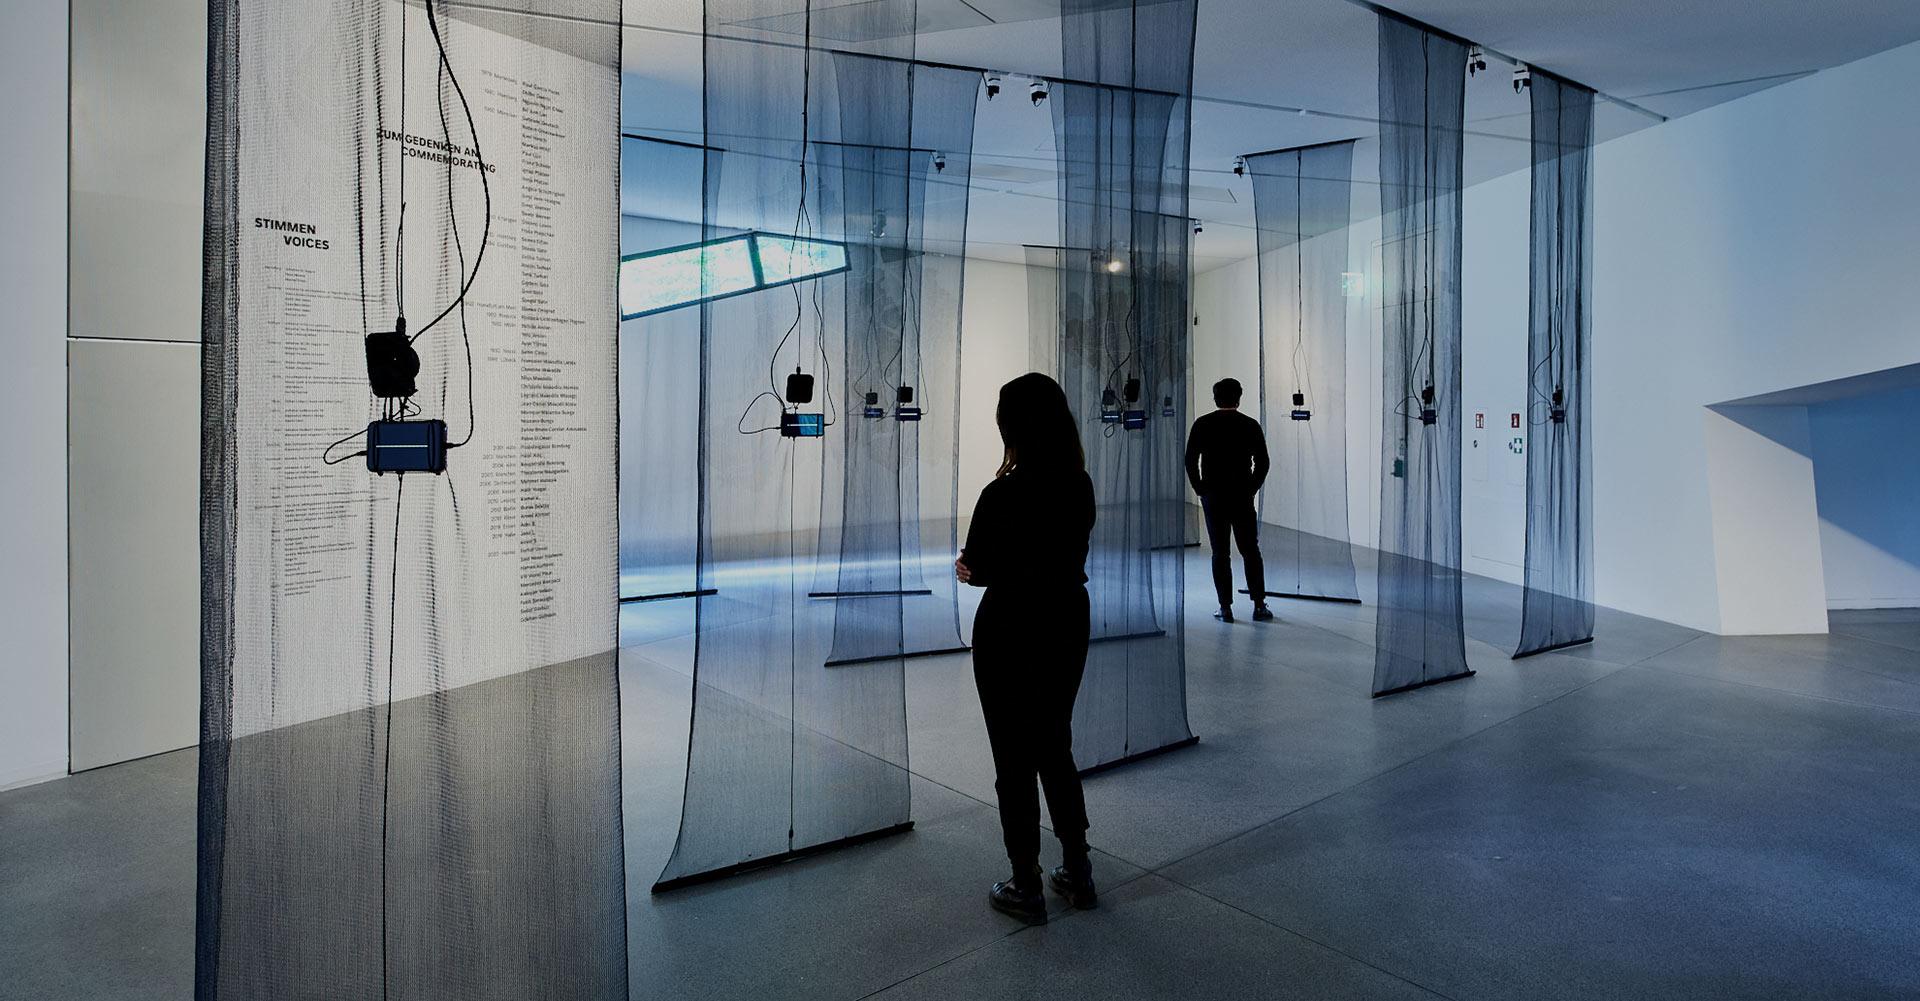 View of the exhibition with visitors, from the ceiling hang black transparent fabric panels, to each of which is attached a smartphone with sound waves on the display